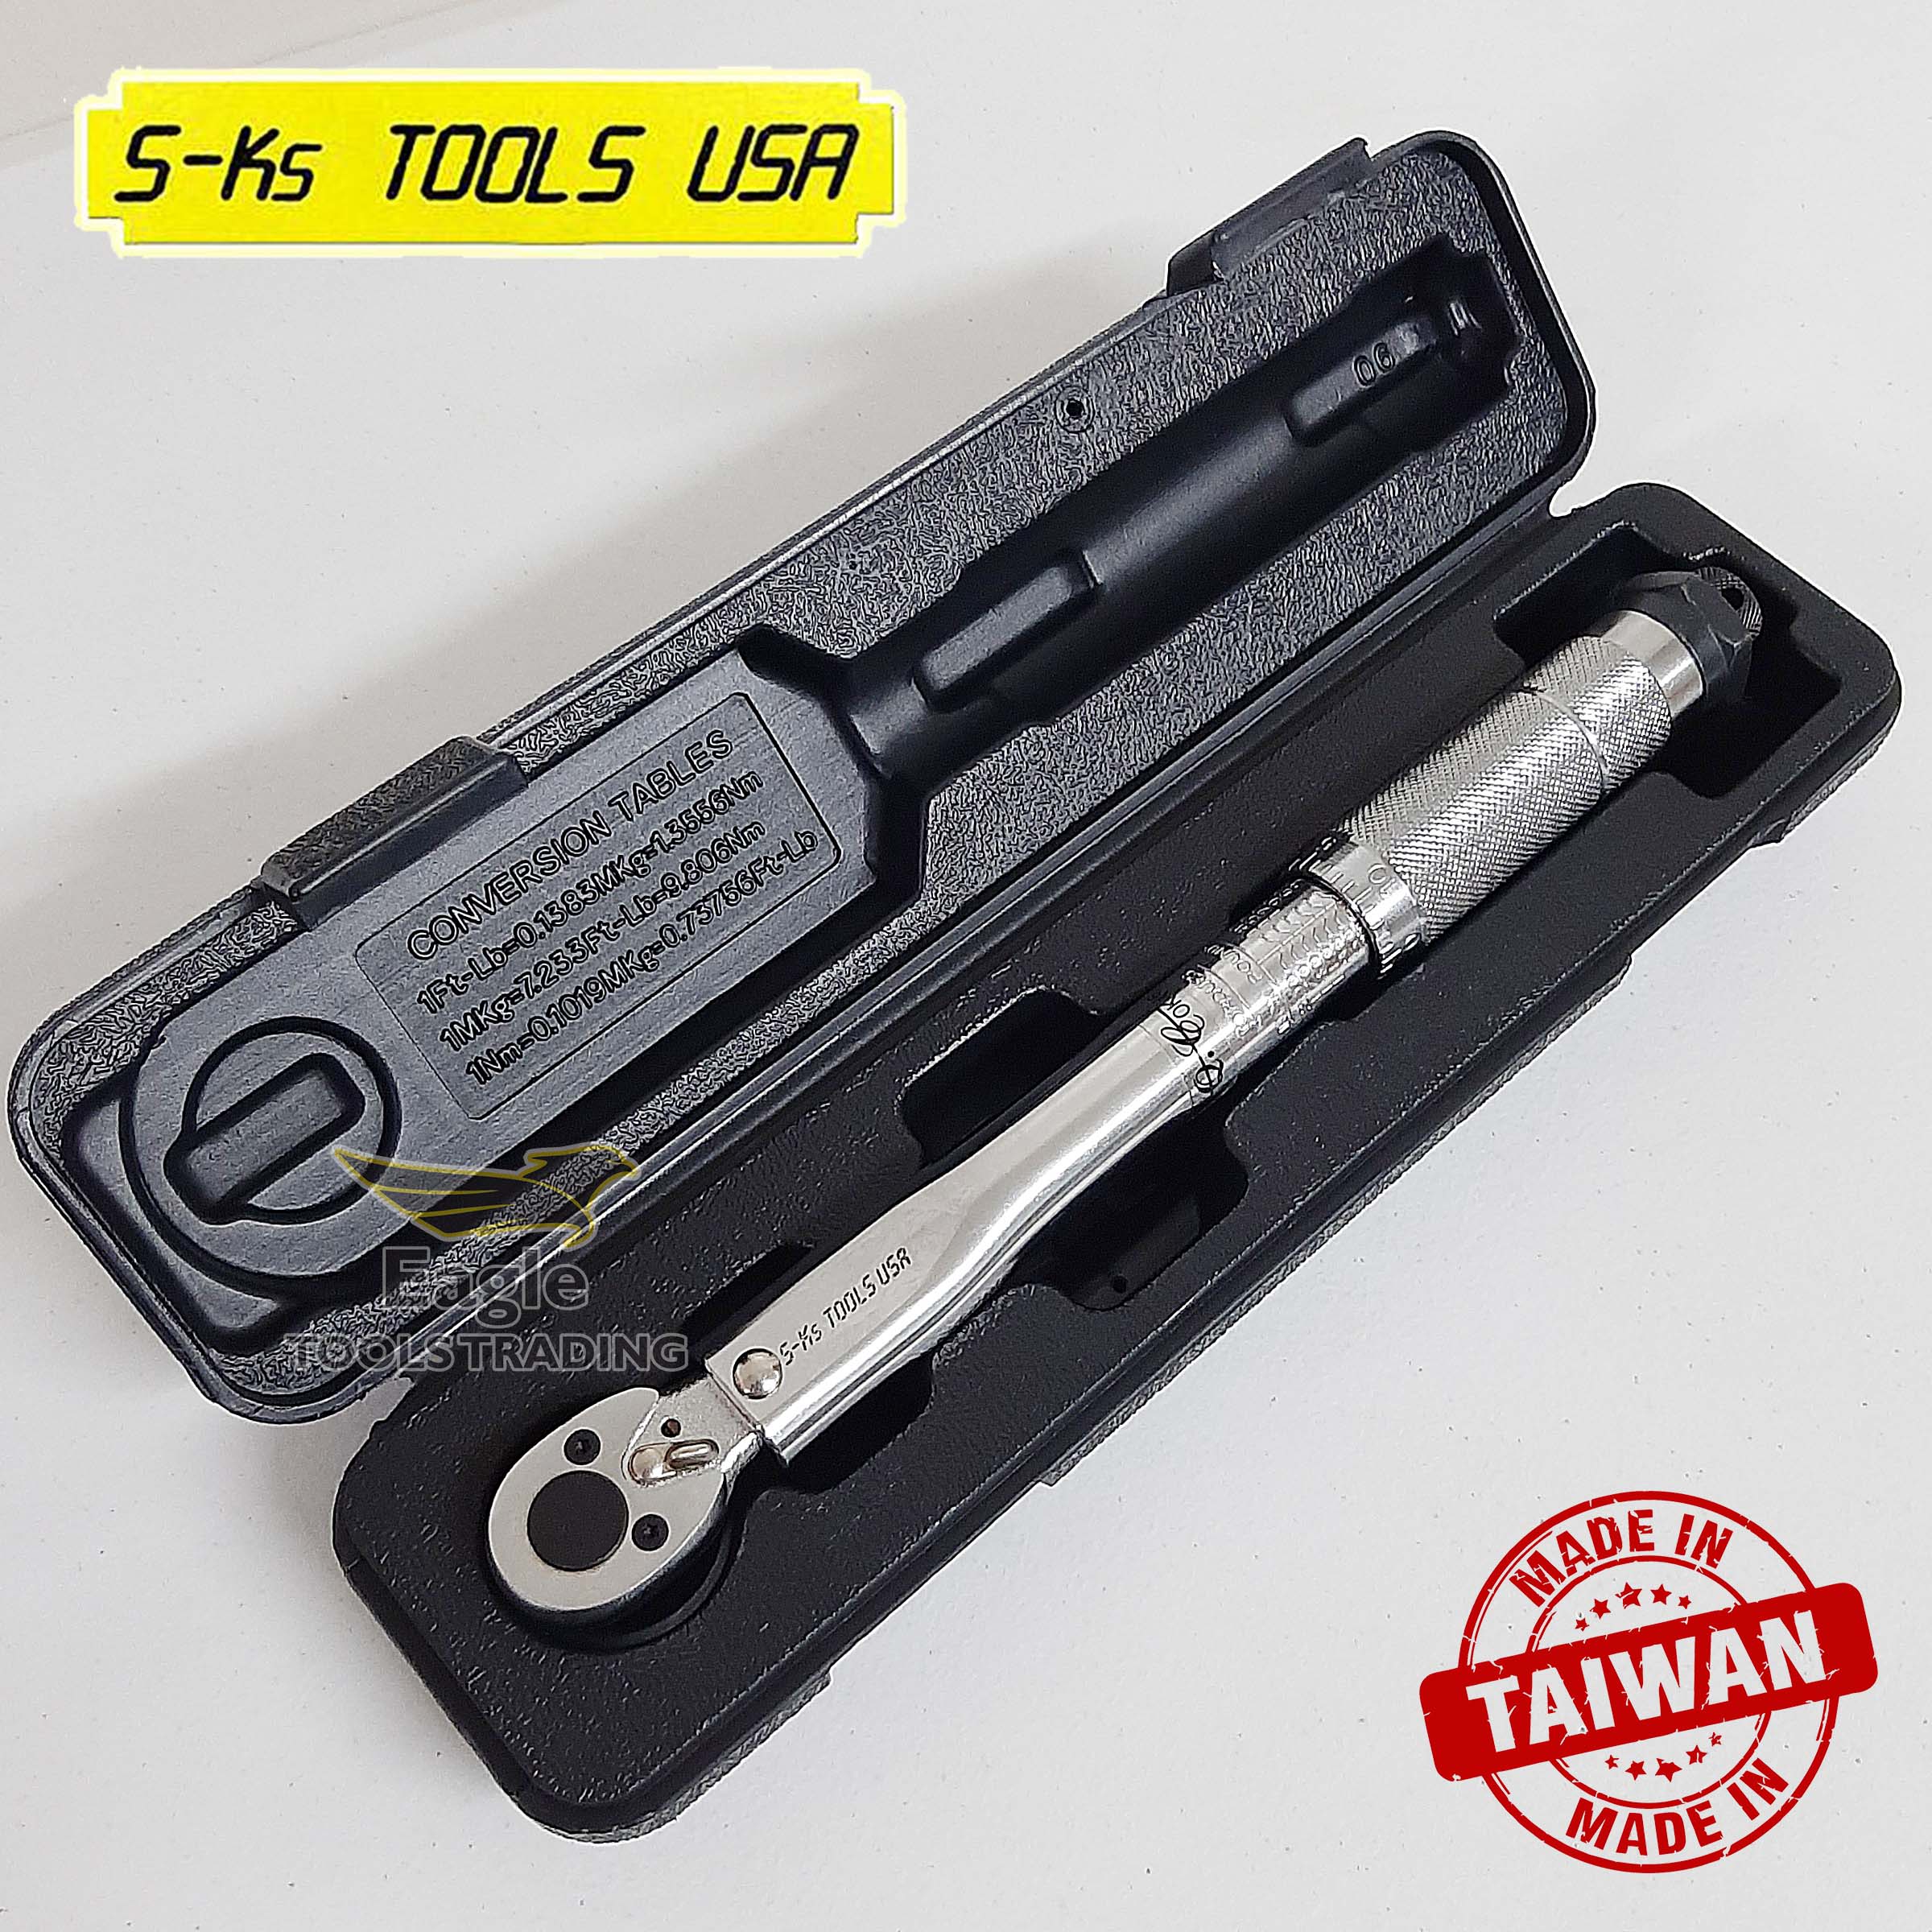 1/4" Drive Clicker Torque Wrench Tool with Case 20-200 inch/pounds 